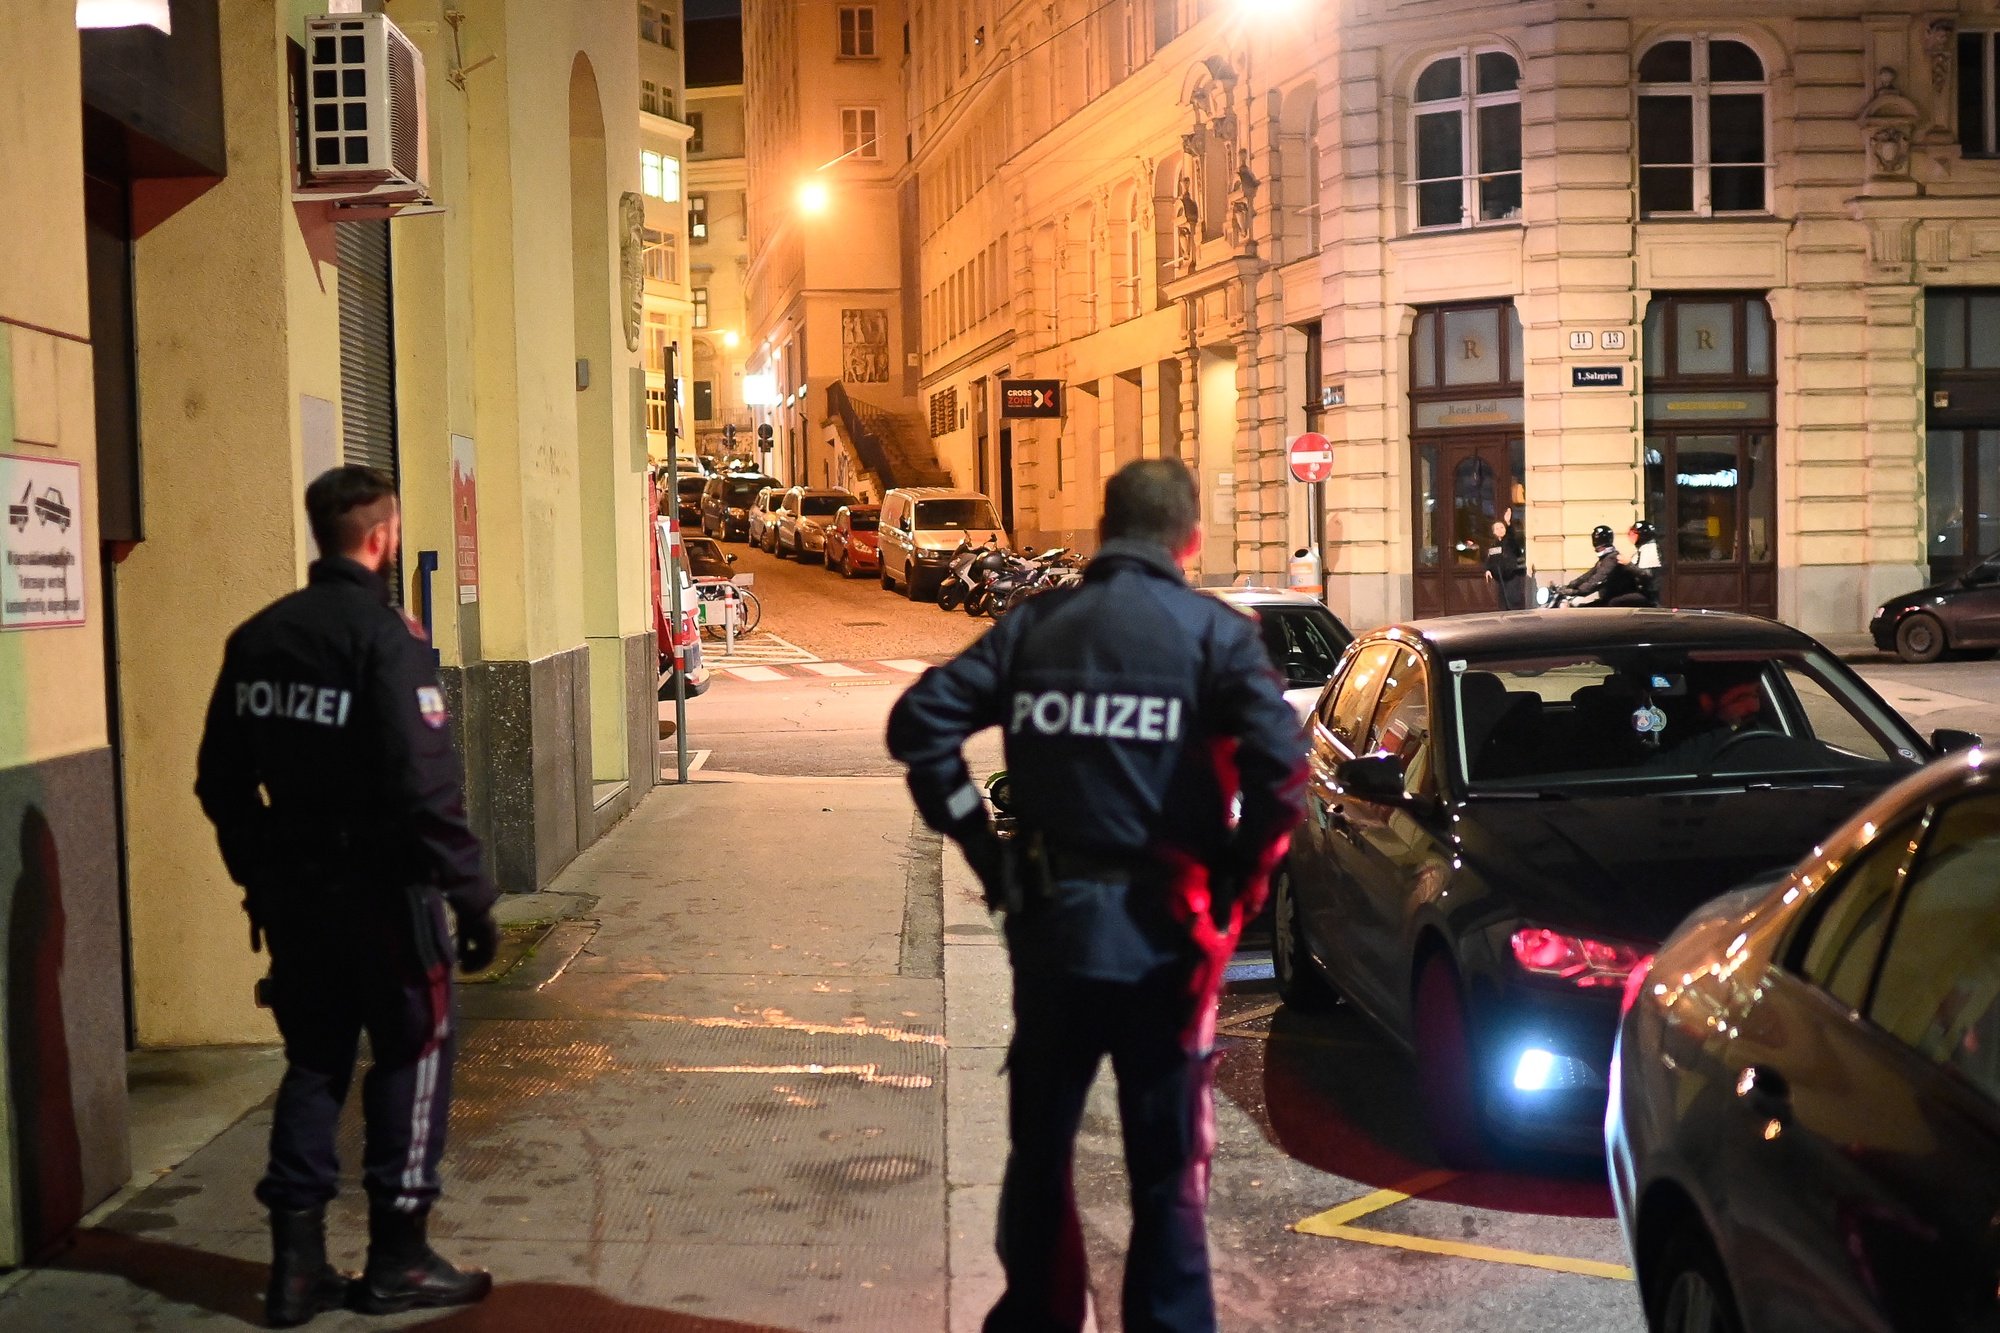 epa08793952 Austrian police patrol after a shooting near the &#039;Stadttempel&#039; synagogue in Vienna, Austria, 02 November 2020. According to recent reports, at least one person is reported to have died and 3 are injured in what officials are treating as a terror attack.  EPA/CHRISTIAN BRUNA